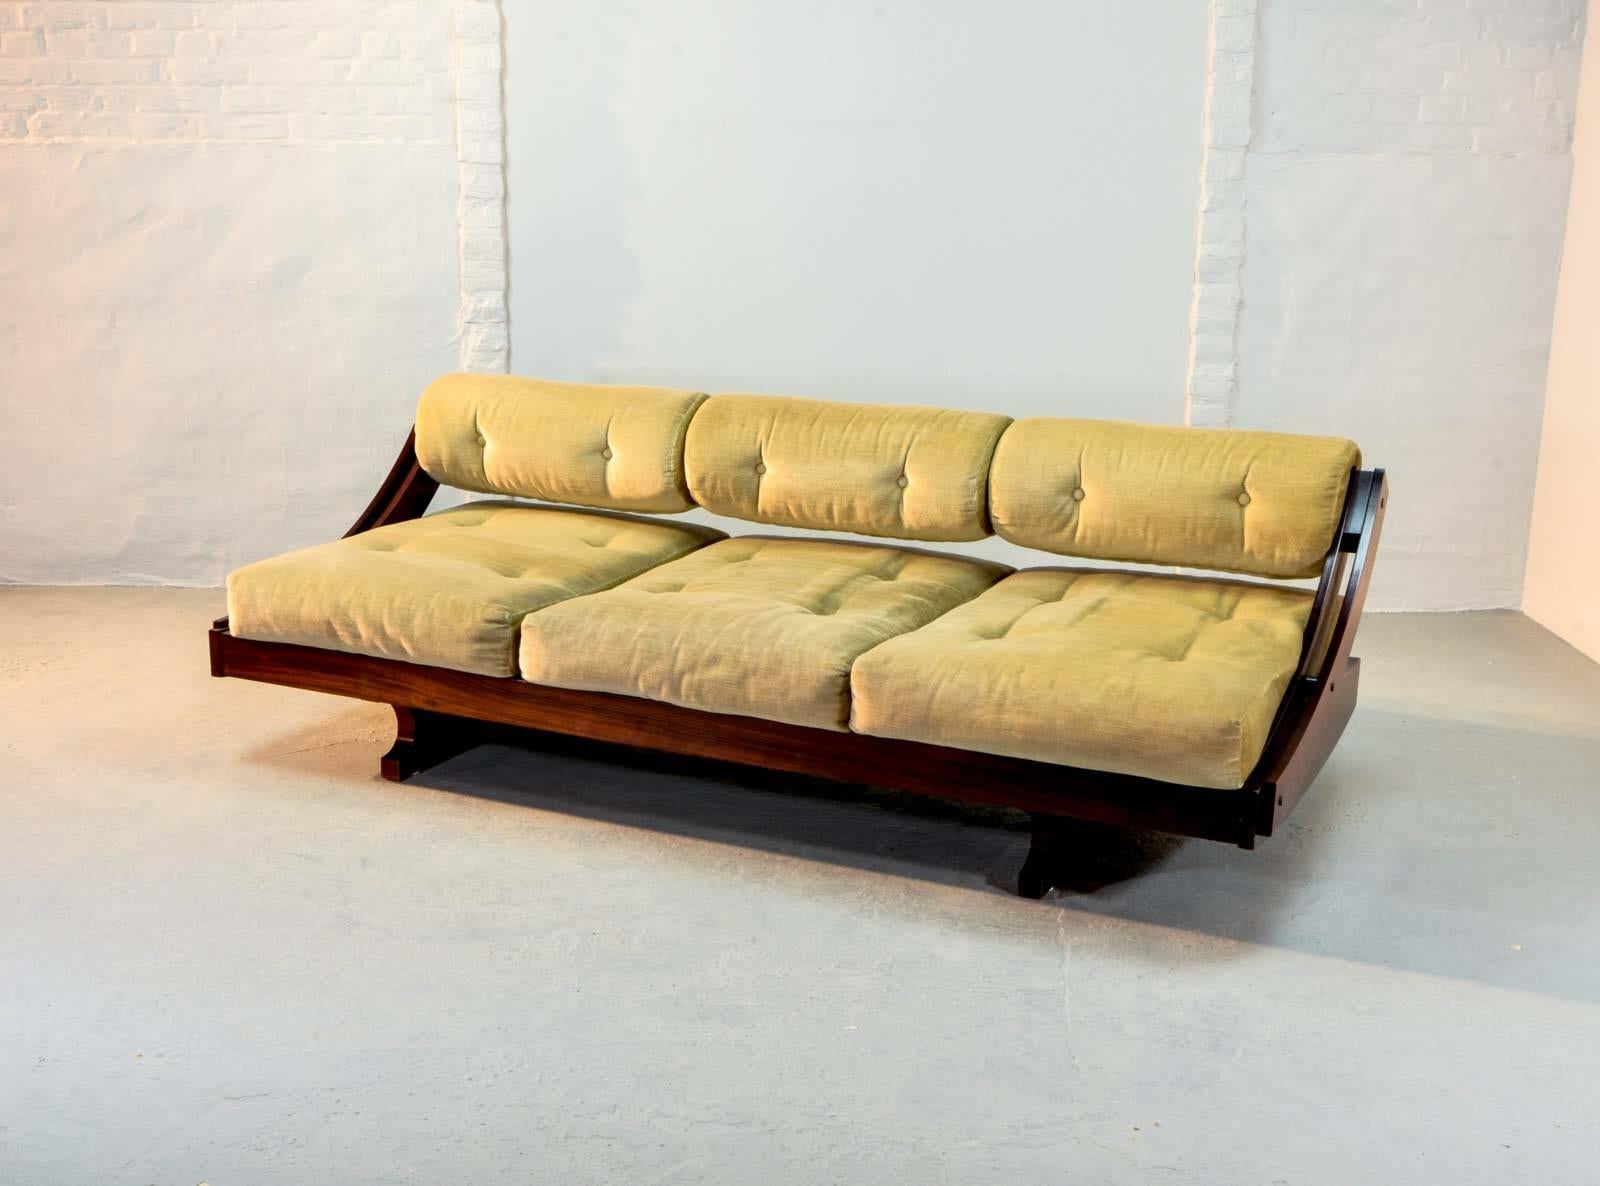 Distinctive Italian designed sofa / daybed GS195 by Gianni Songia for Sormani in 1963. The labelled sofa easily transforms into a daybed by shifting the sophisticated shaped backrest. This very comfortable three-seat rosewood sofa daybed with